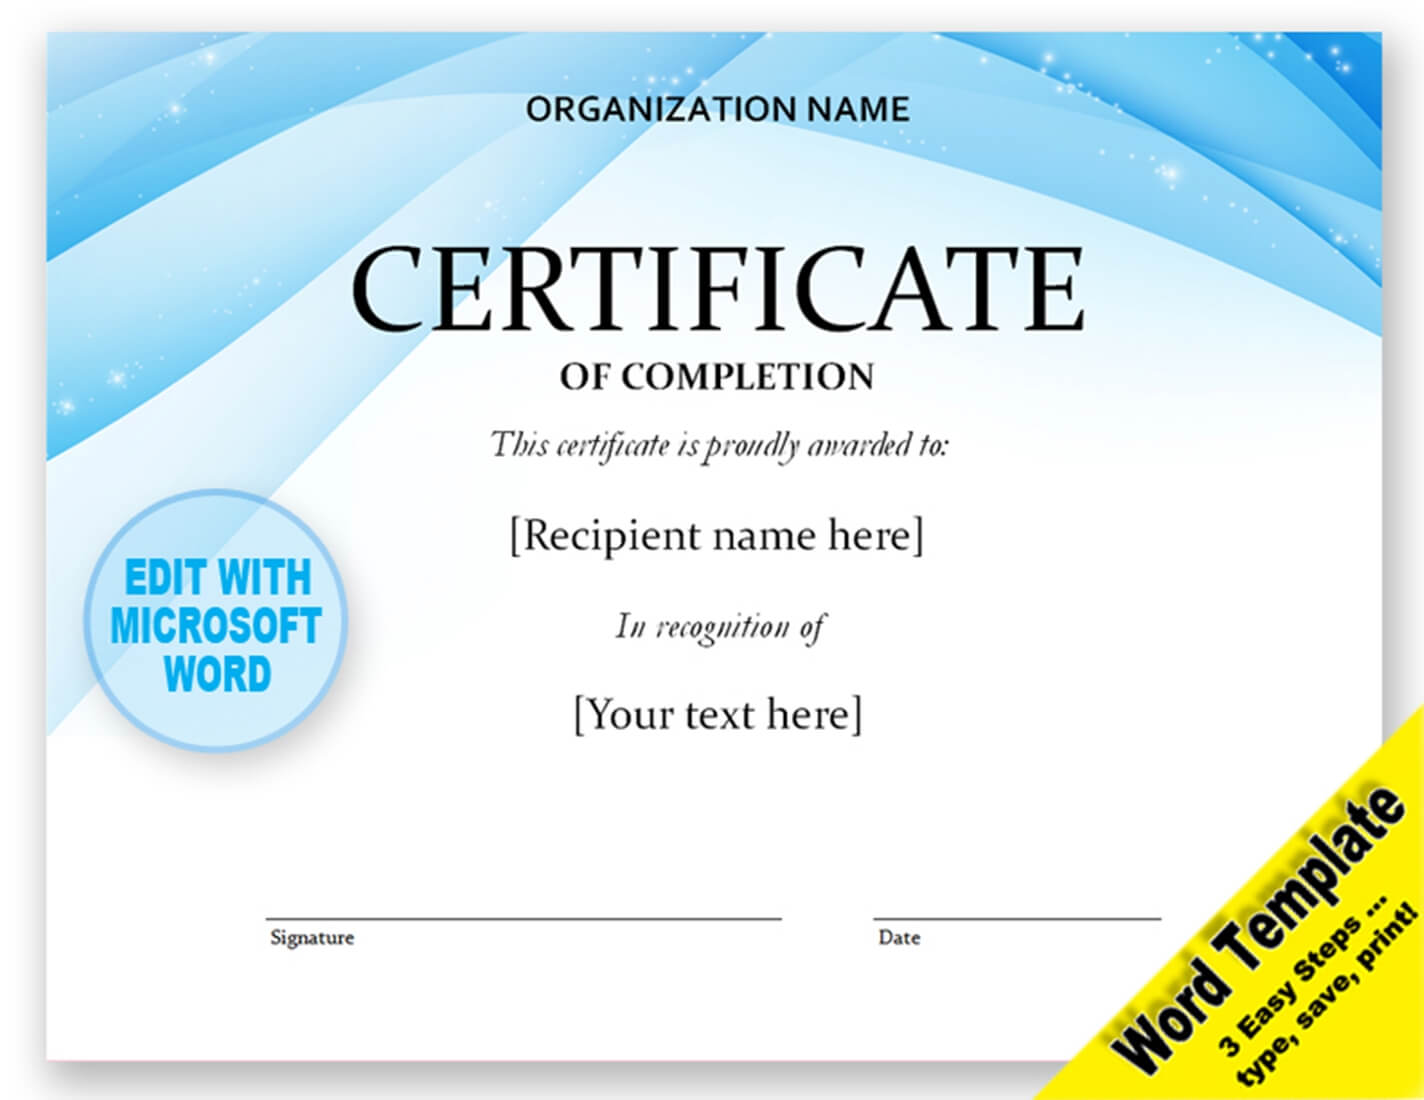 Contemporary Certificate Of Completion Template Digital Download With Downloadable Certificate Templates For Microsoft Word